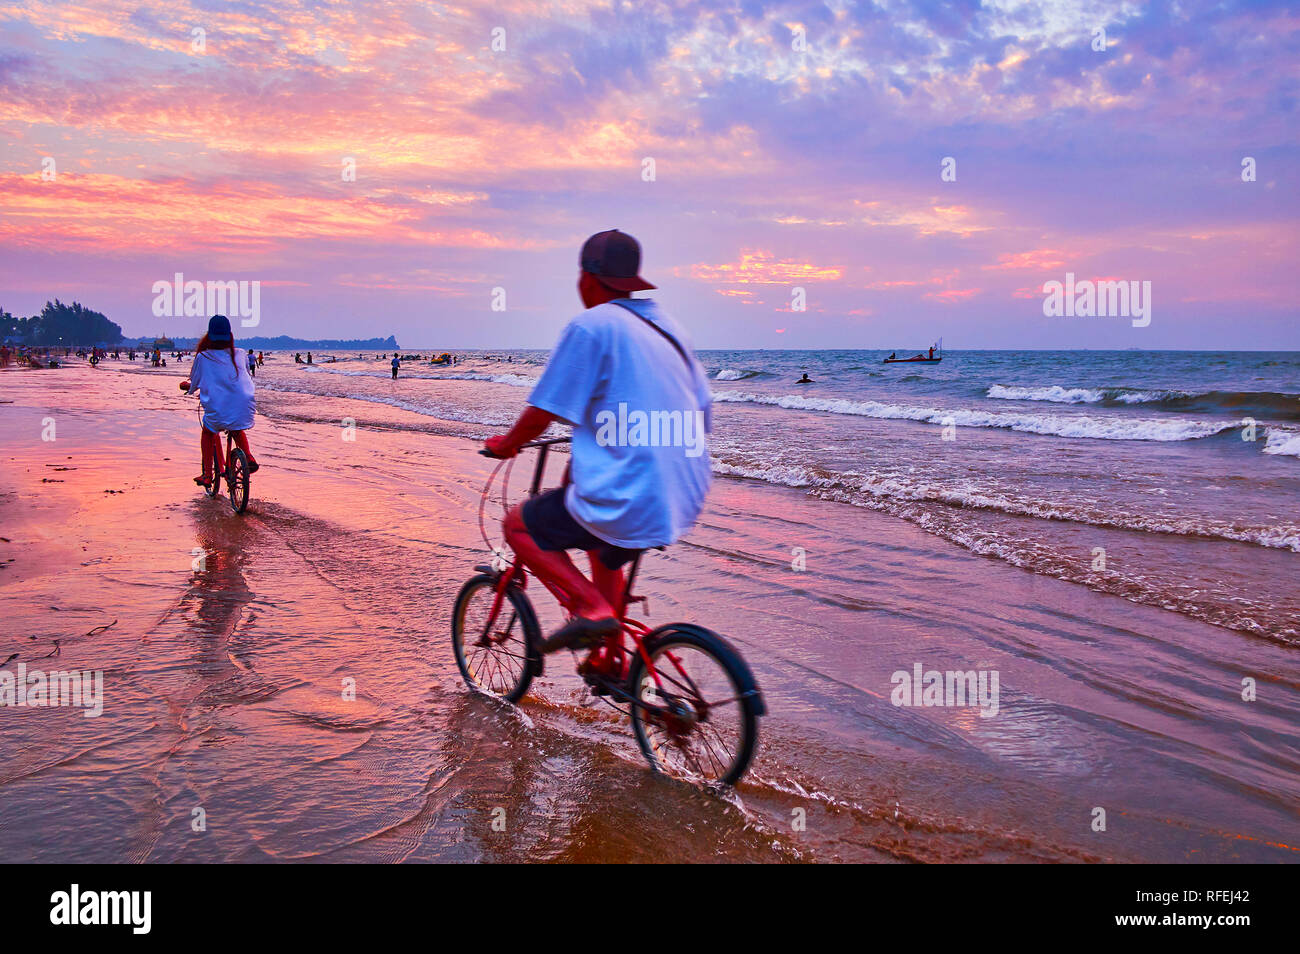 The cyclers enjoy the beach on Bay of Bengal, riding along the swash line on sunset, Chaung Tha, Myanmar. Stock Photo